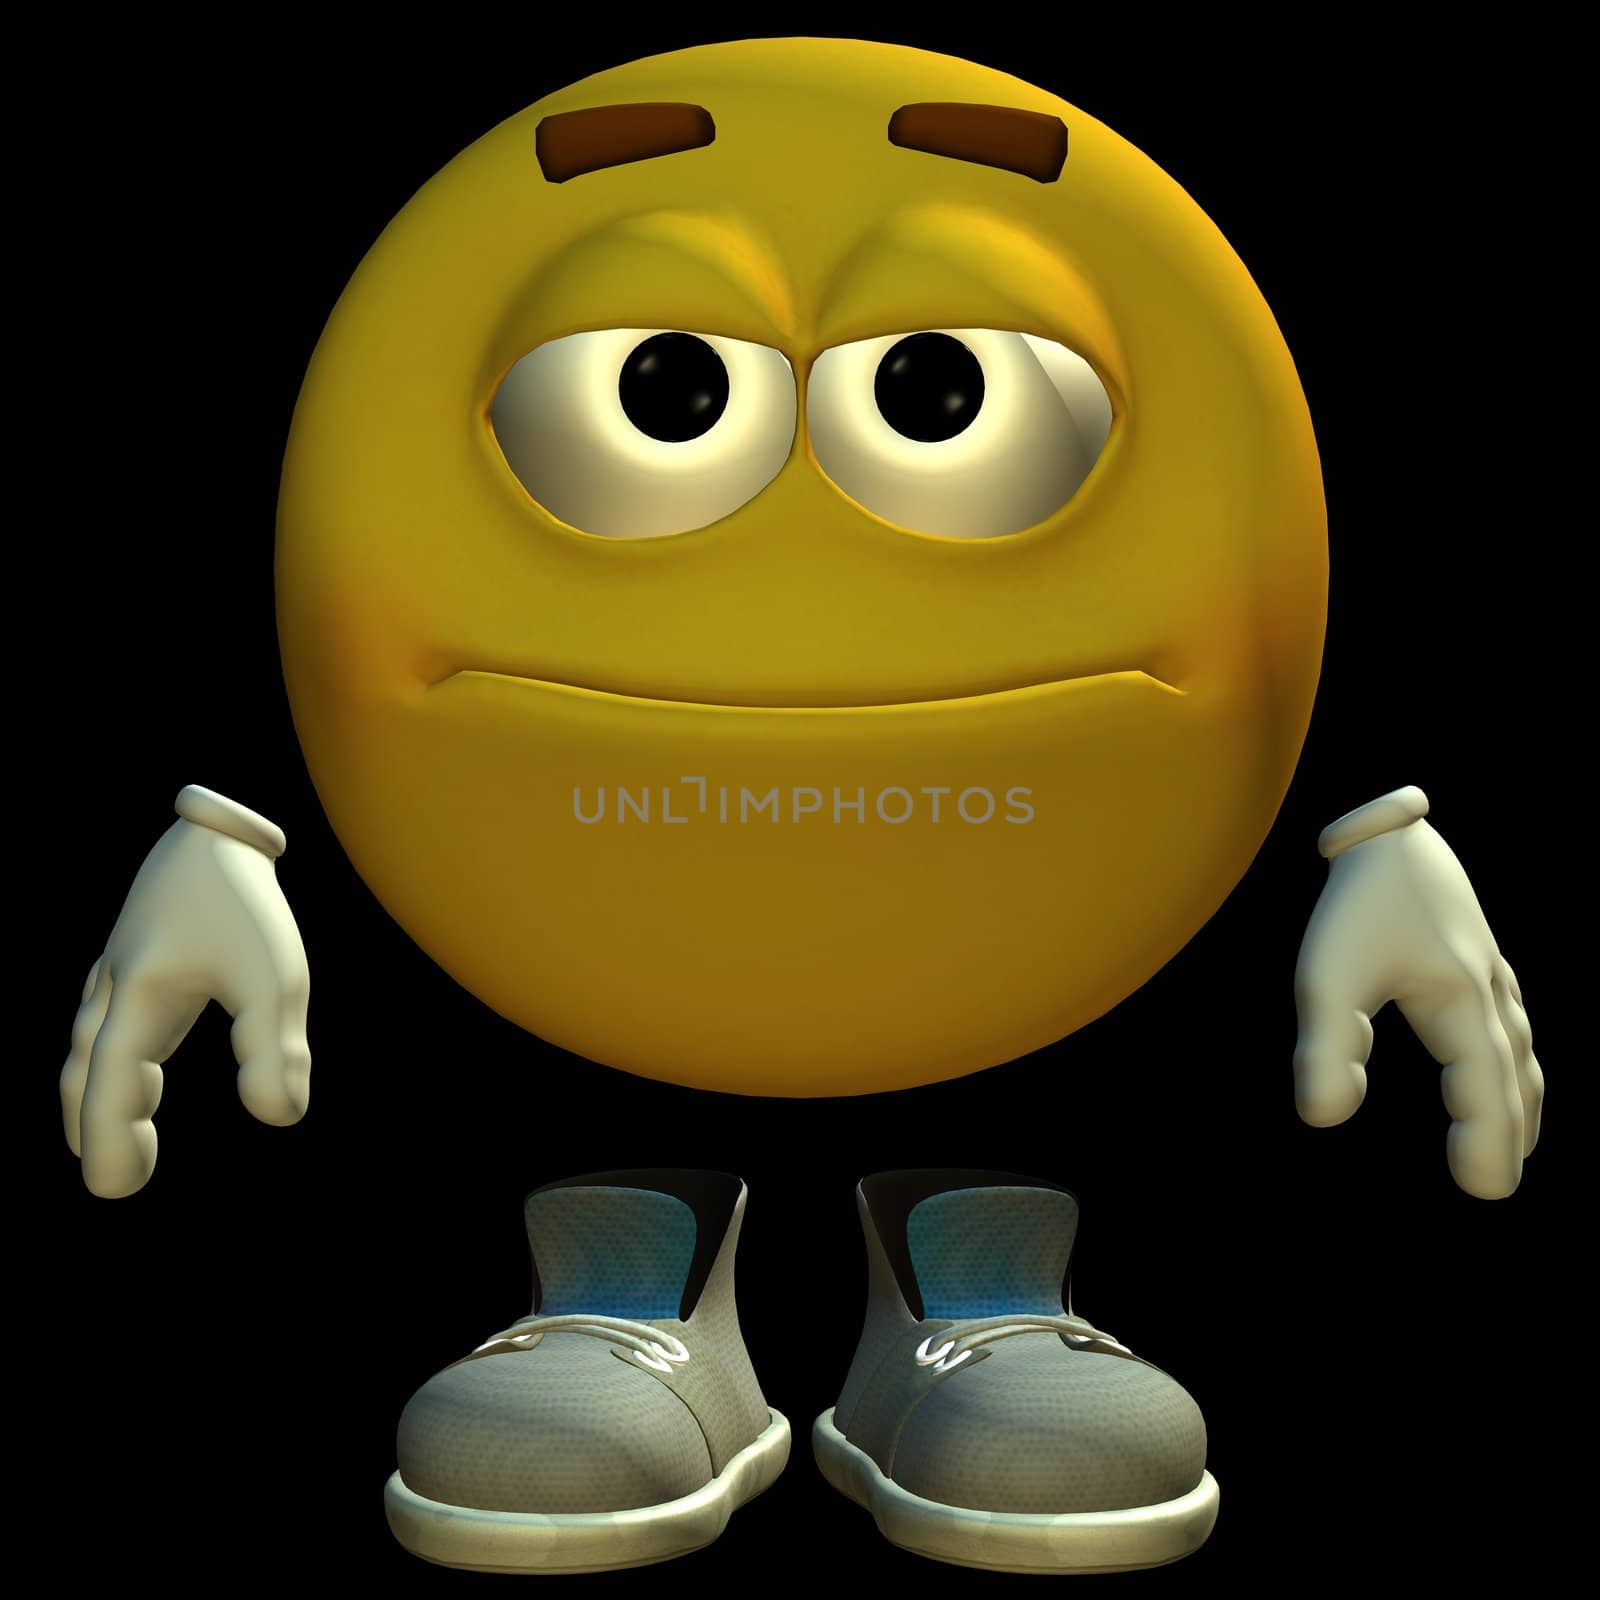 3D rendered emoticon on black background isolated